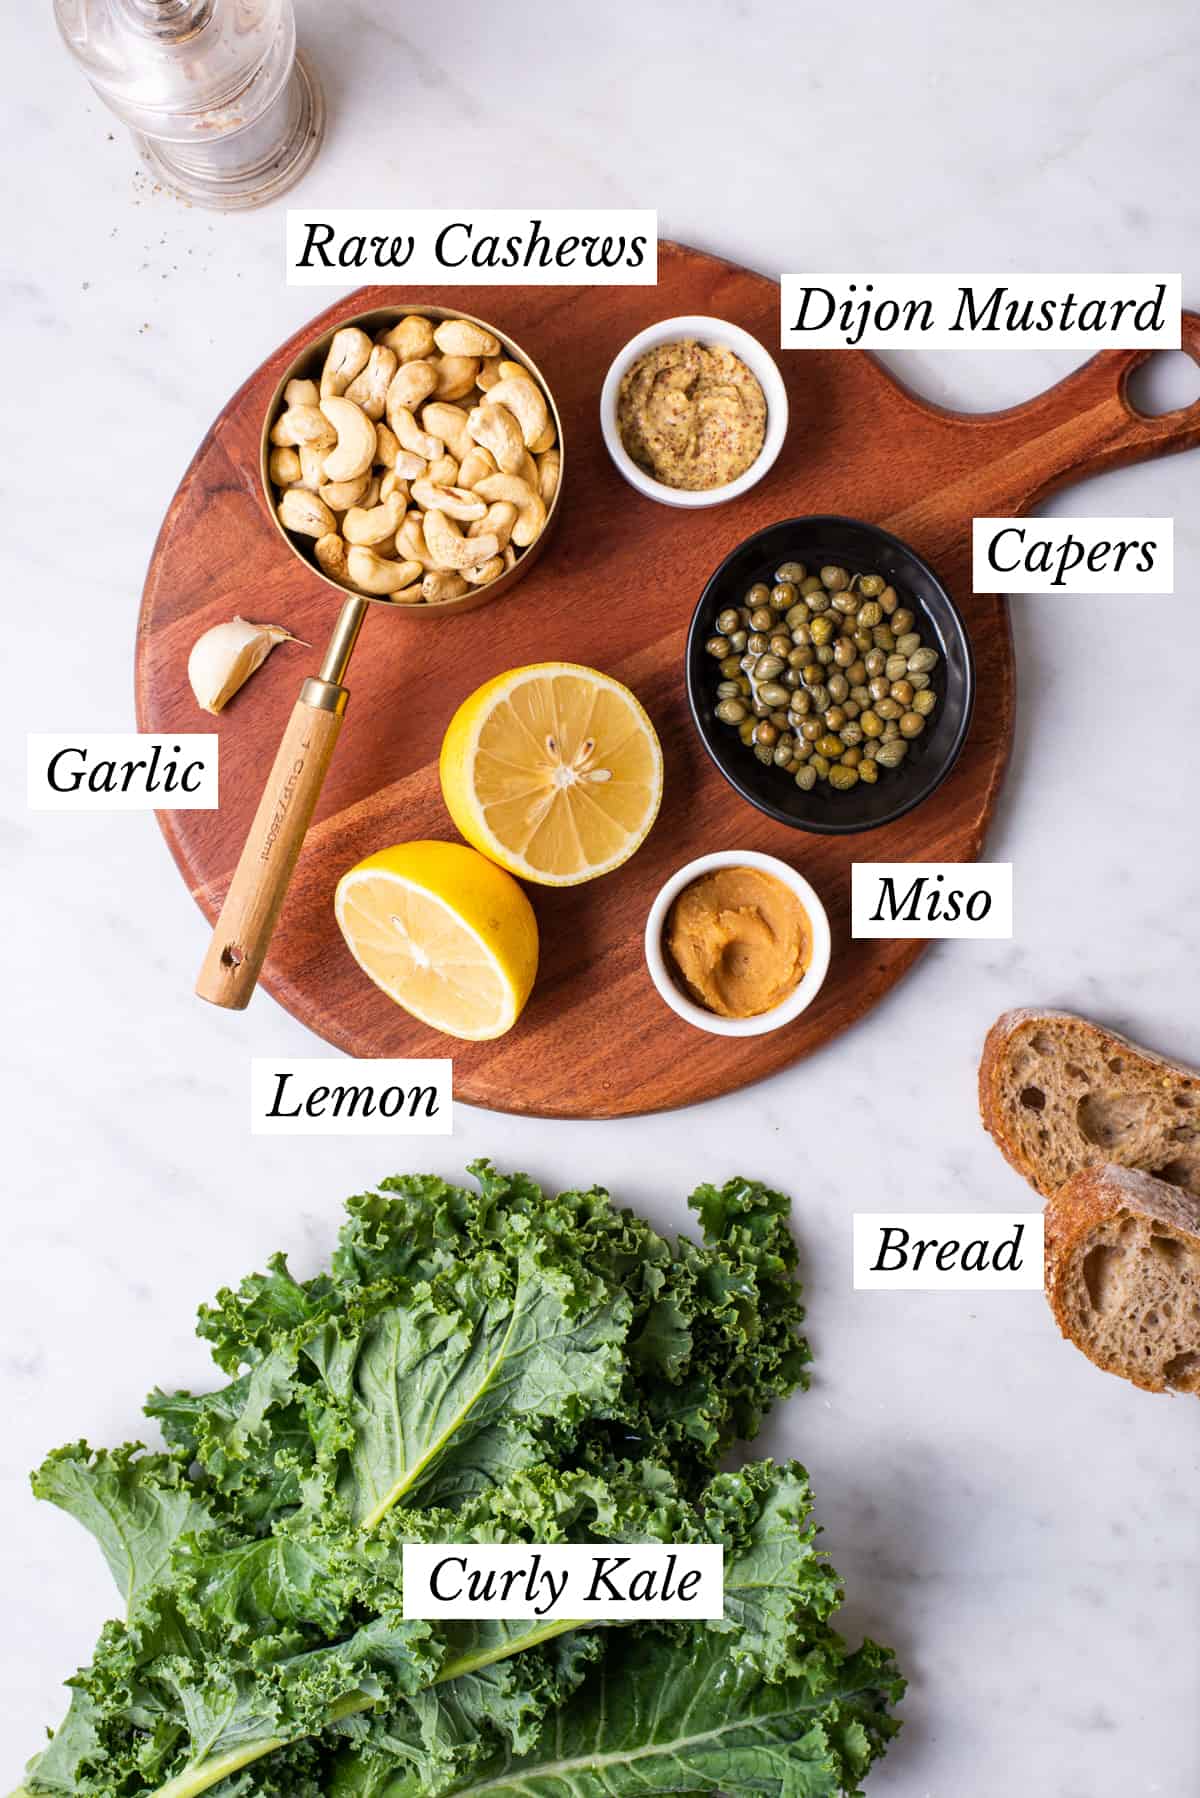 Ingredients gathered to make vegan Caesar dressing laid out on wooden board.